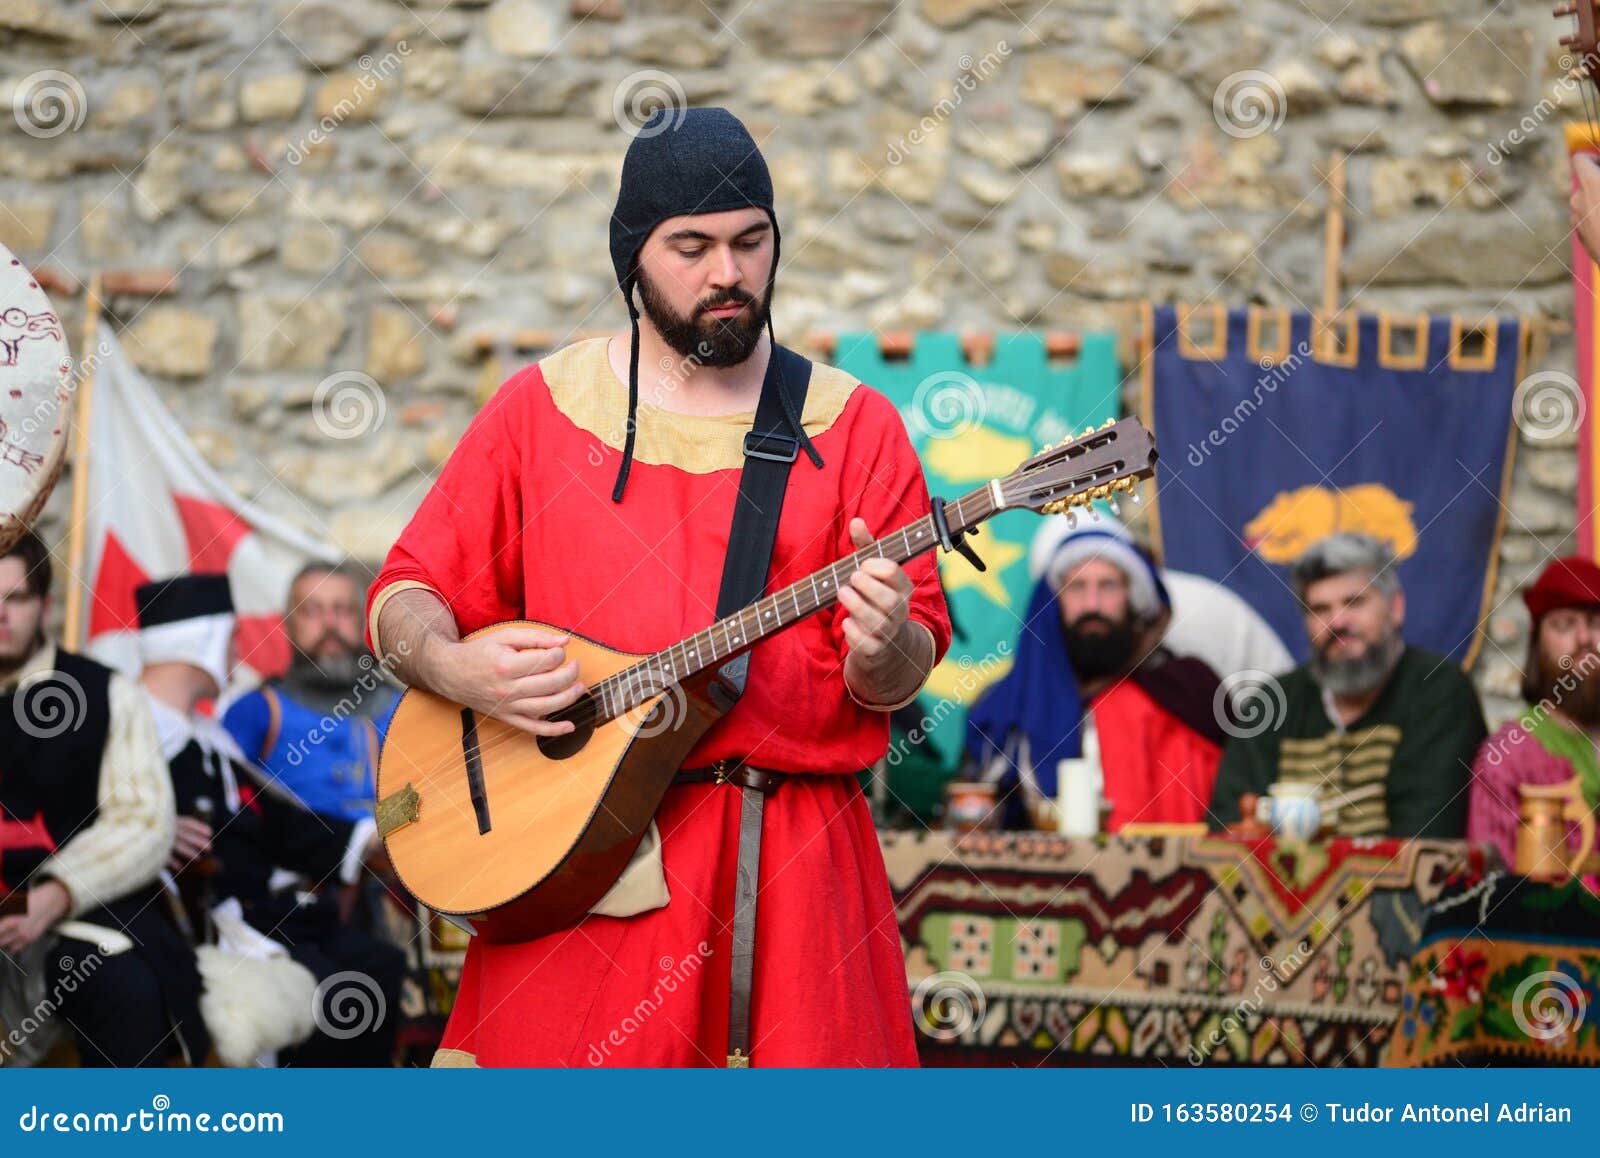 Medieval guitar minstrel editorial stock image. Image of military